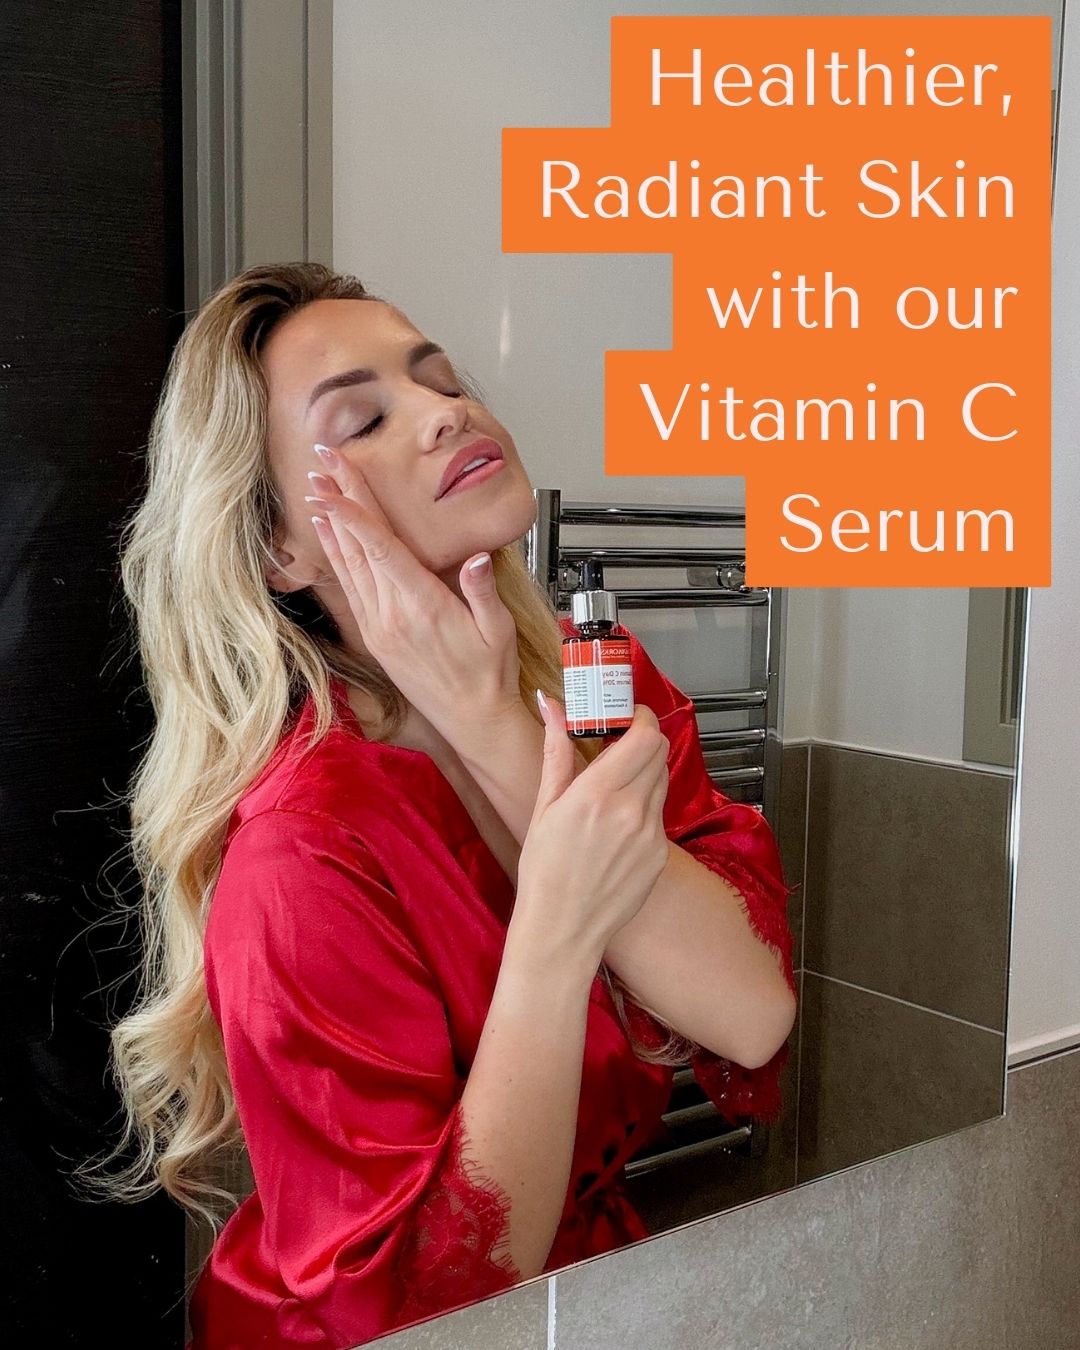 Attractive young blonde woman massages Dermaworks' vitamin c serum for face into her cheeks for anti-wrinkle and skin brightening results.